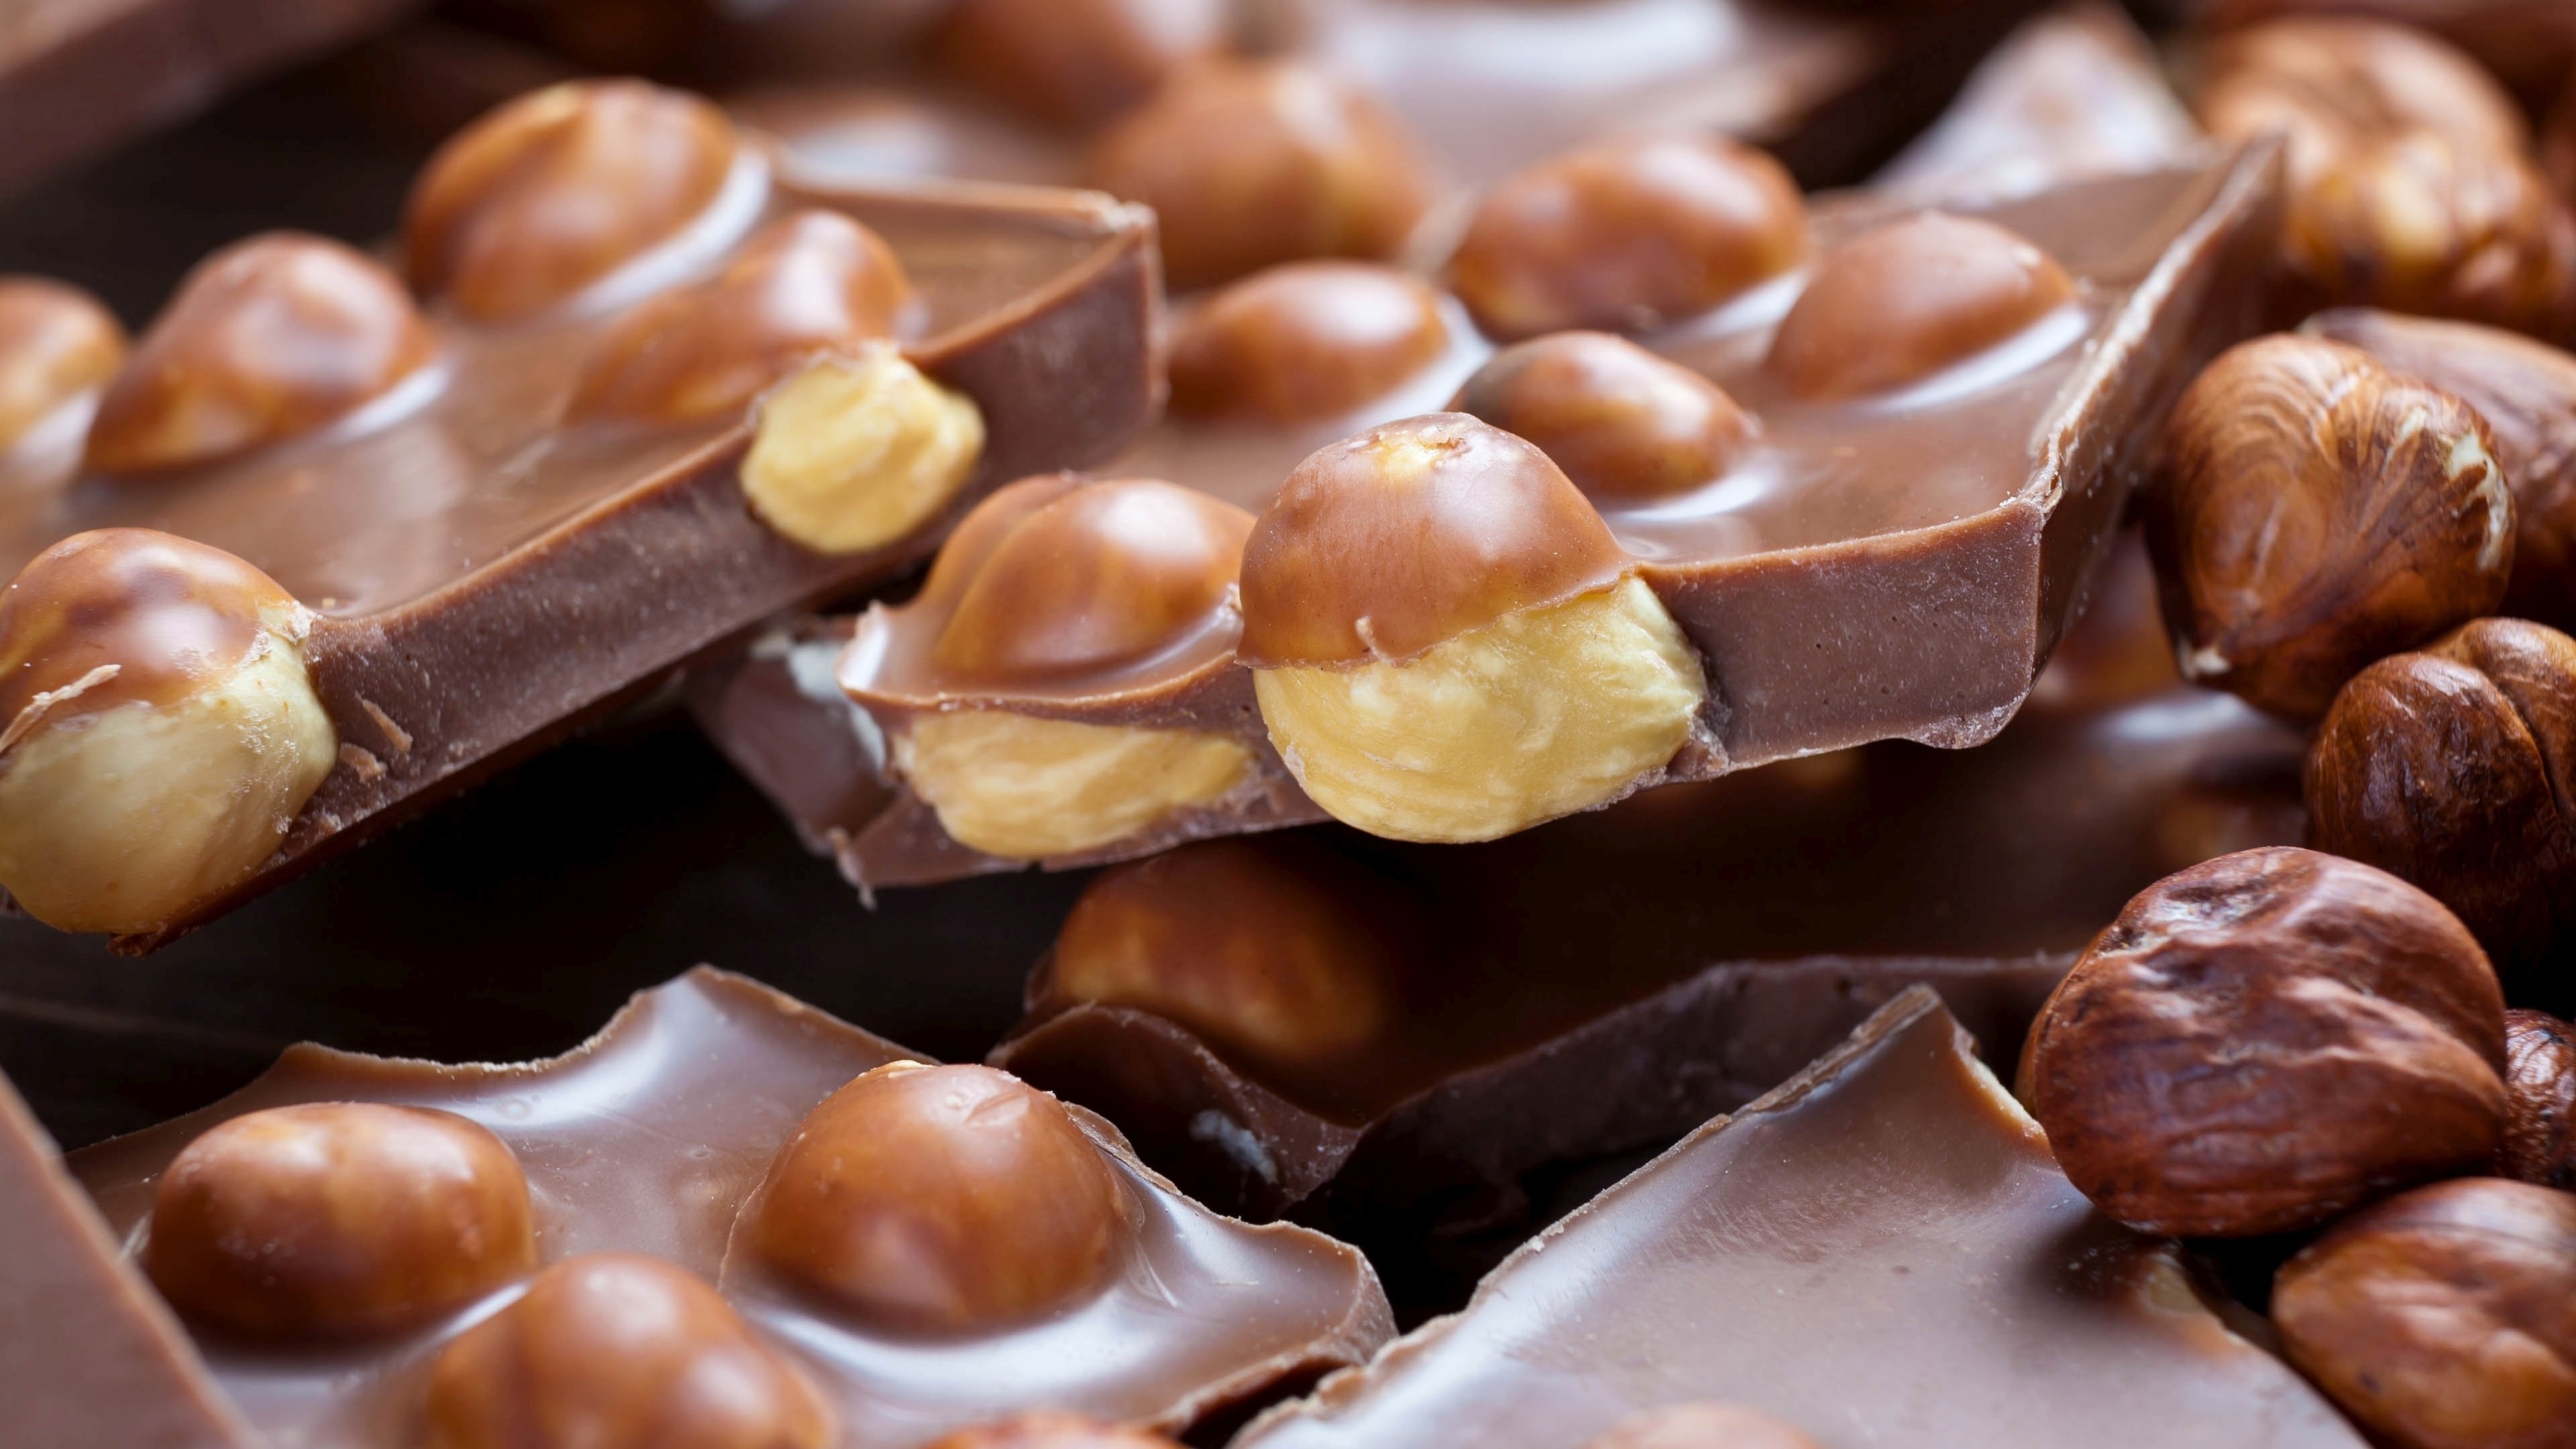 Hazelnuts: Milk chocolate with filberts, Oregon’s official State Nut since 1989. 3840x2160 4K Background.